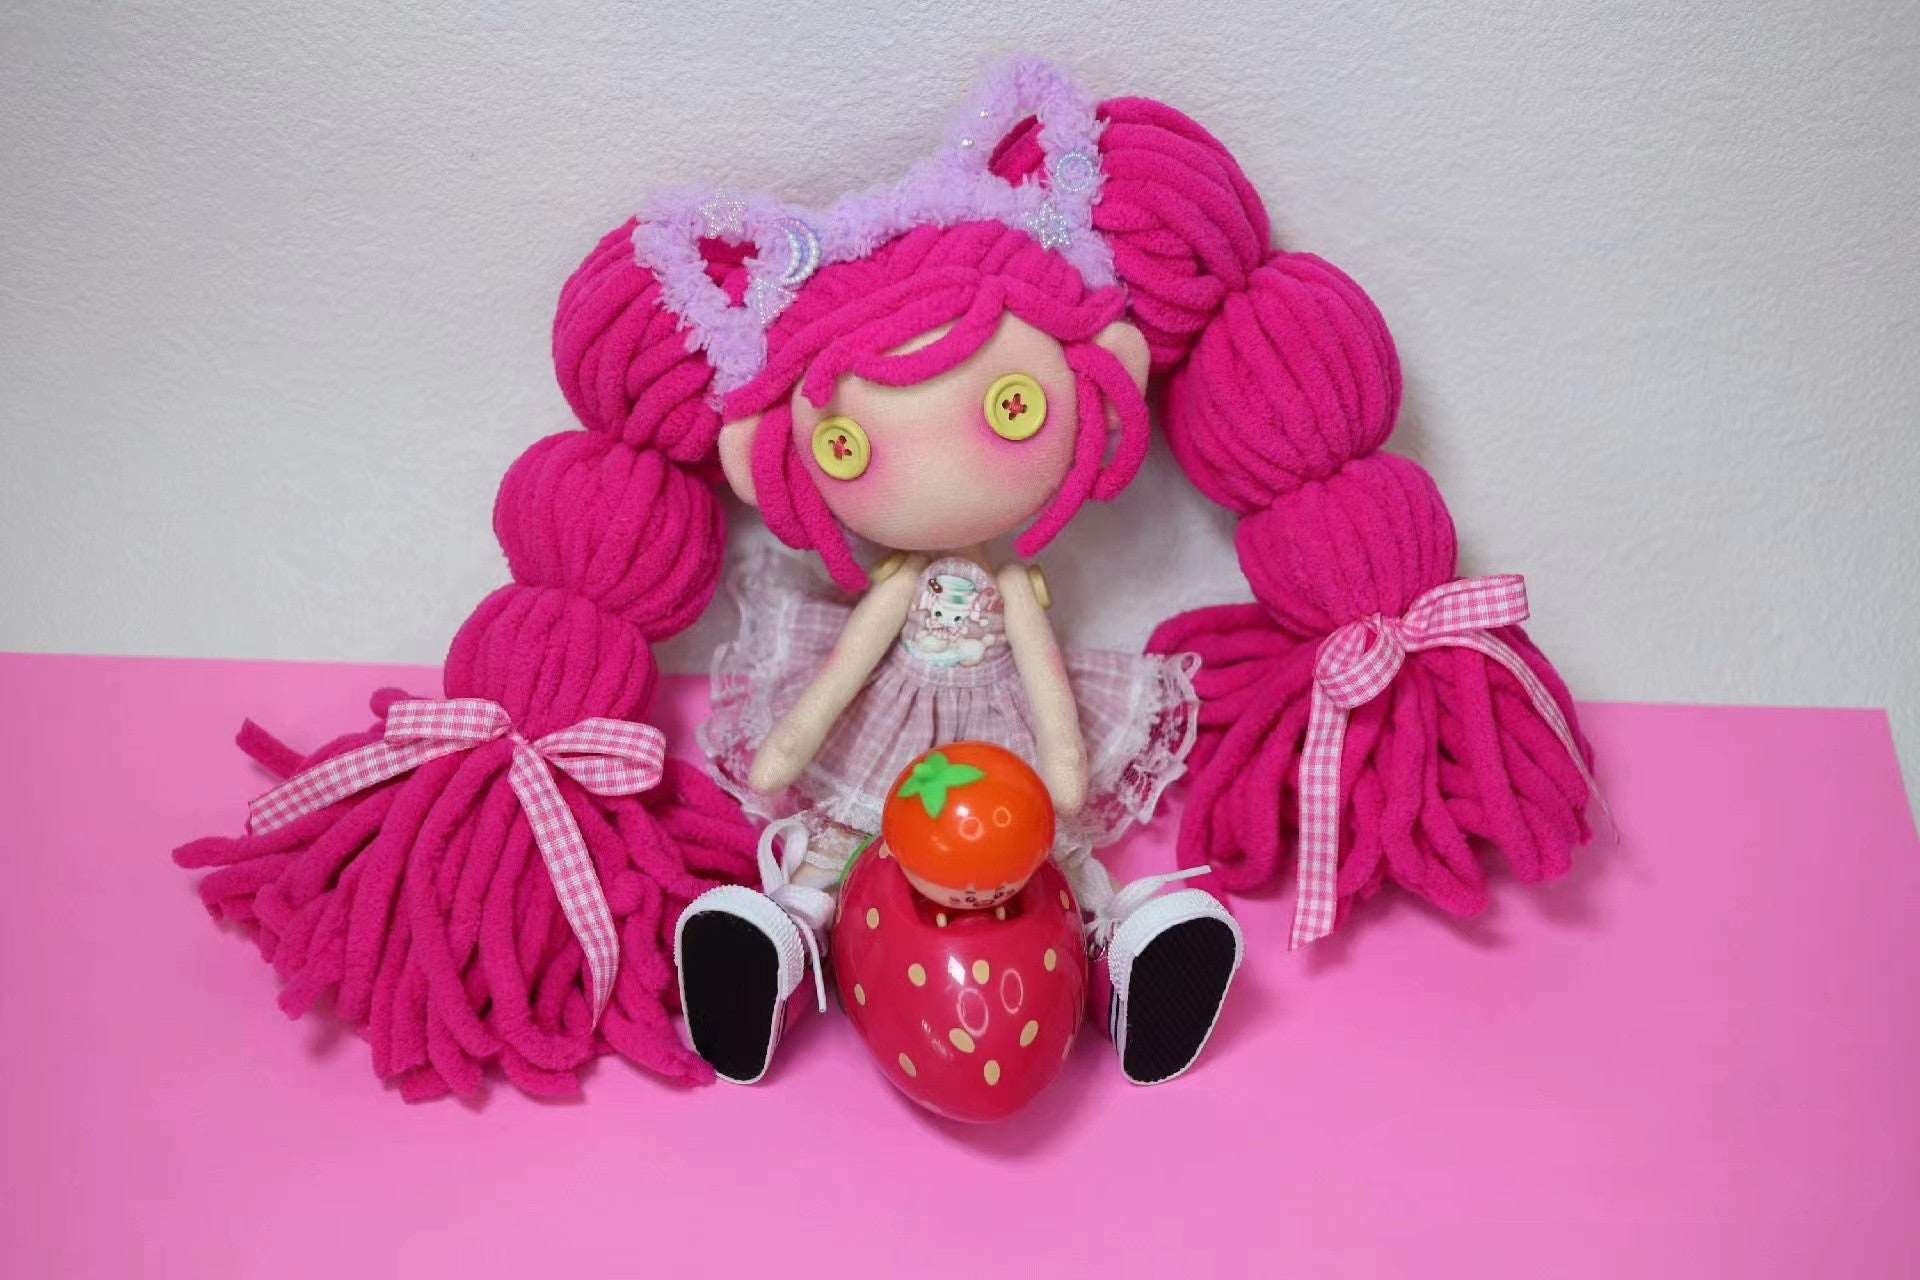 Artisan Crafted Doll Toys and Gifts for Collectors